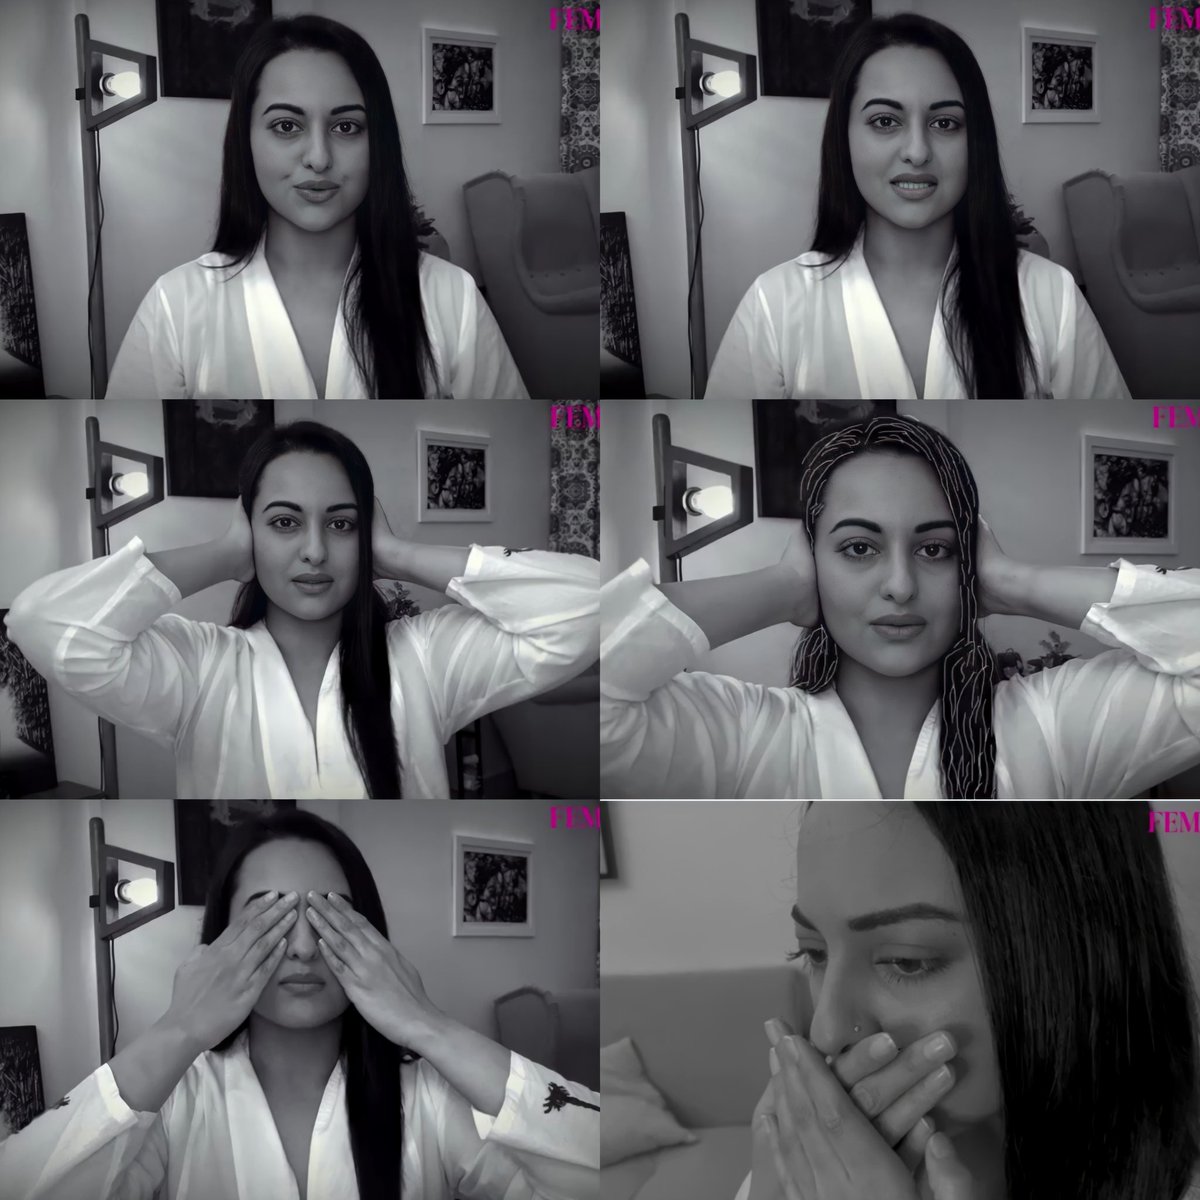 #ActAgainstAbuse  A Femina Campaign
Domestic violence is real.
In India, one-third of women experience domestic violence and the pandemic has seen a drastic rise in cases. 

86% of women in India who were subjected to domestic violence never sought help.
#SonakshiSinha #AsliSona